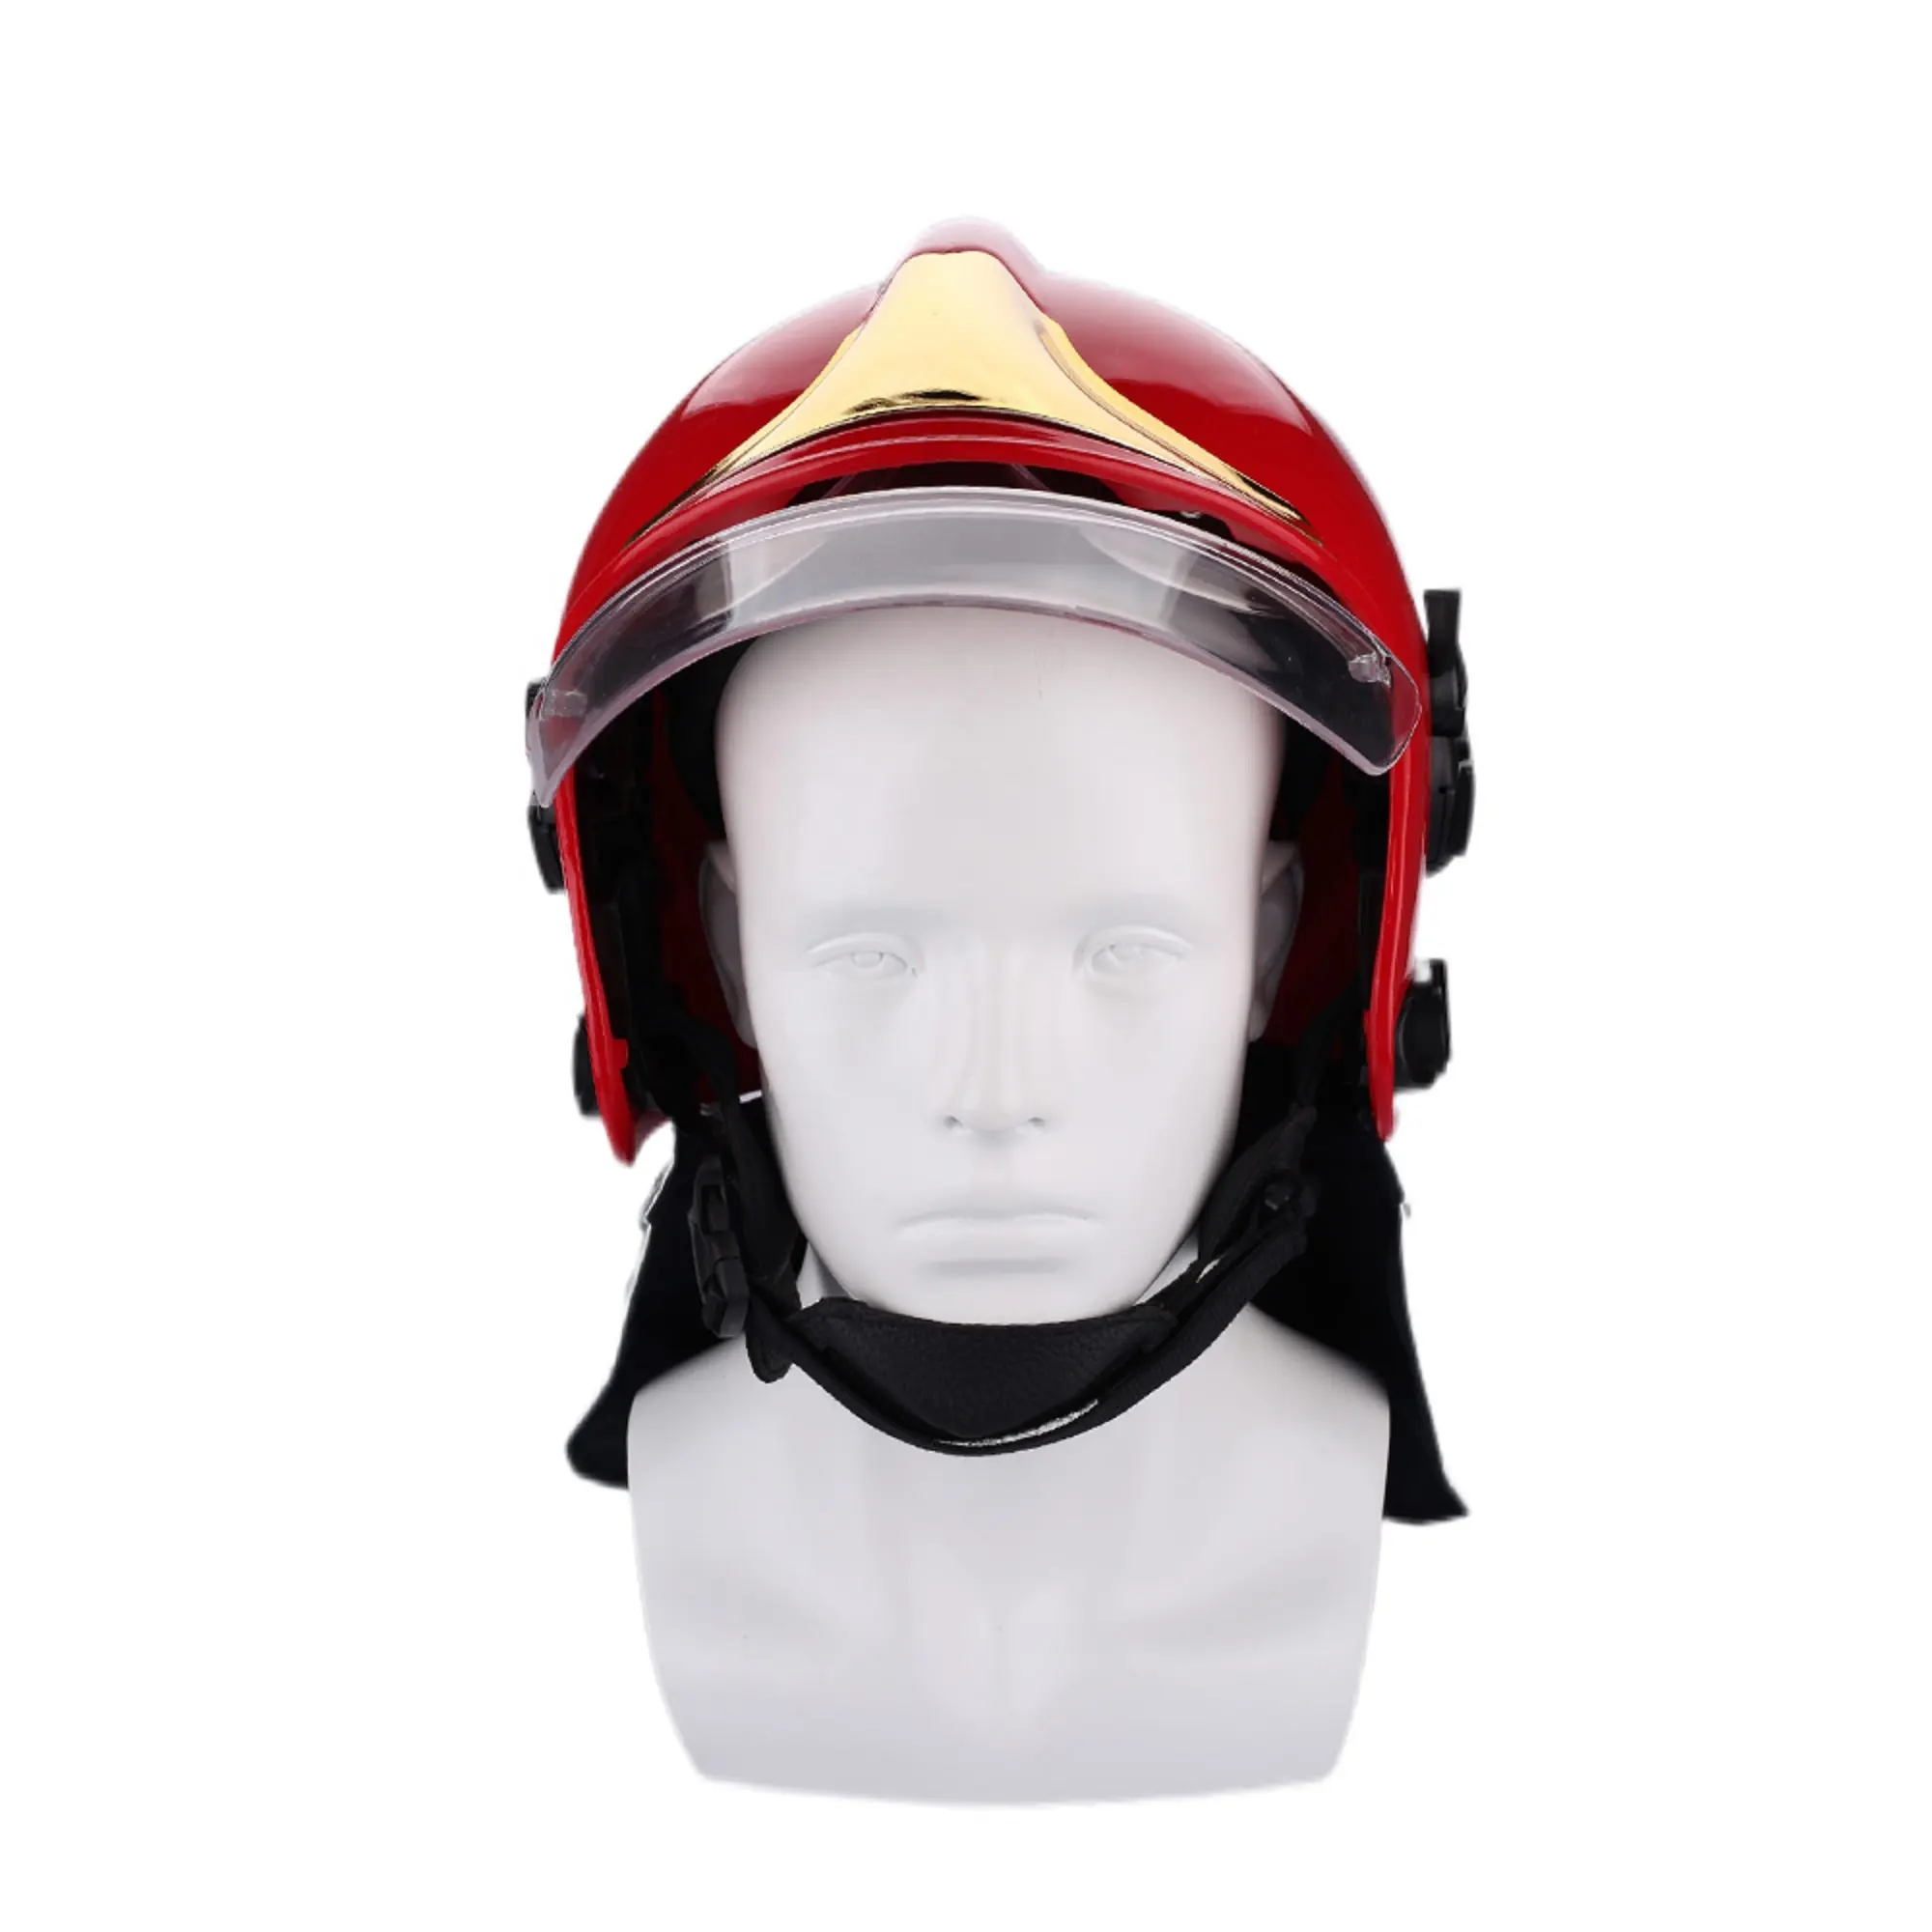 European Style Fire Fighting Emergency Rescue Safety Fireman Helmets Protective